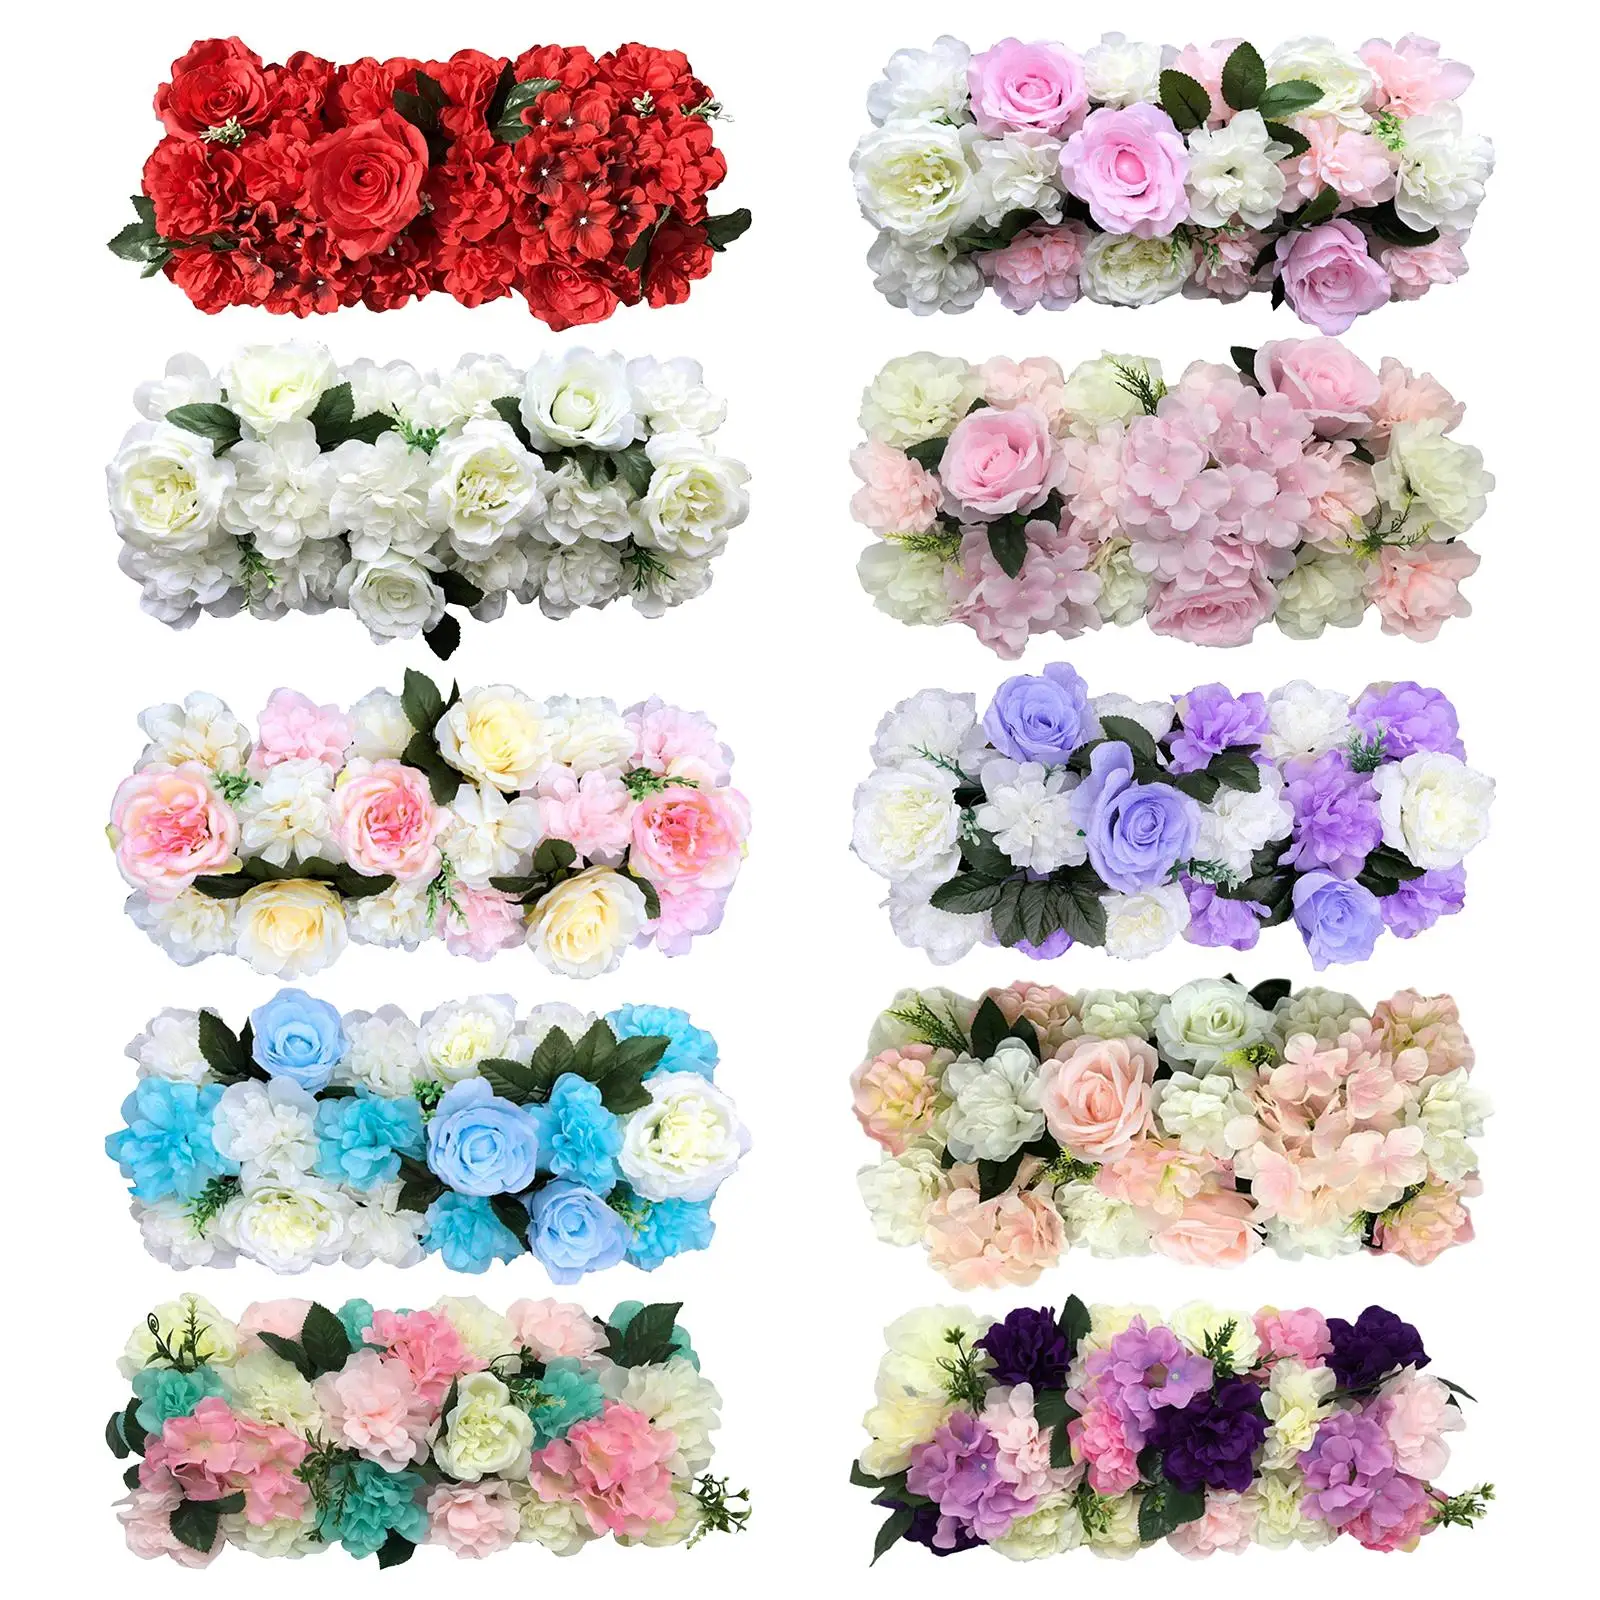 3D Flower Wall Decor Wedding Road Flowers Flowers Wall Panel for Bouquet Nails Room Bridal Shower